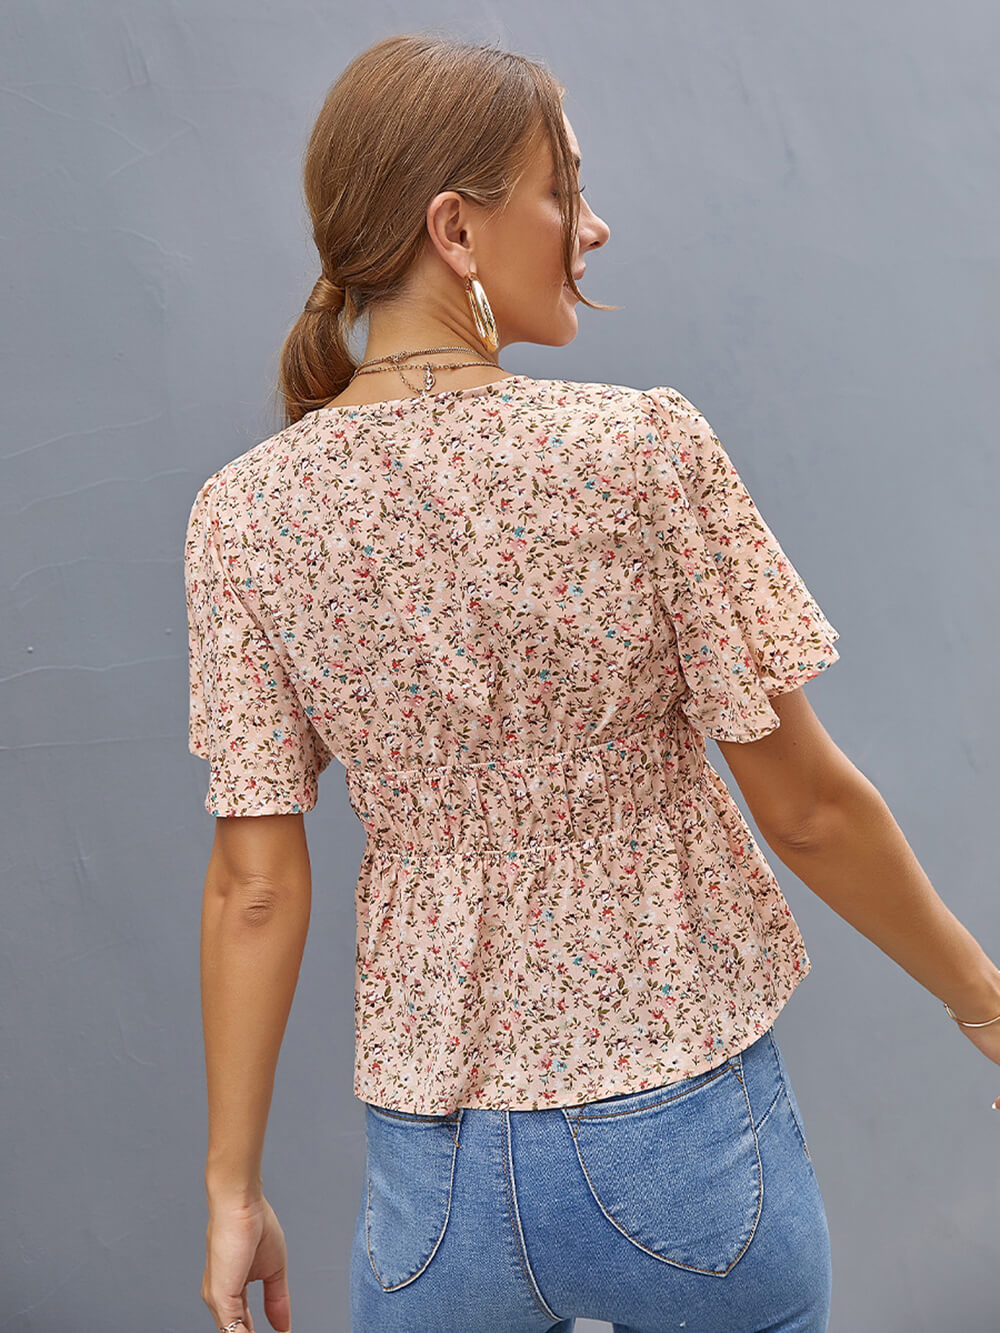 MECALA Women's V-Neck Drawstring Floral Print Short Sleeve Casual Top-Pink back view